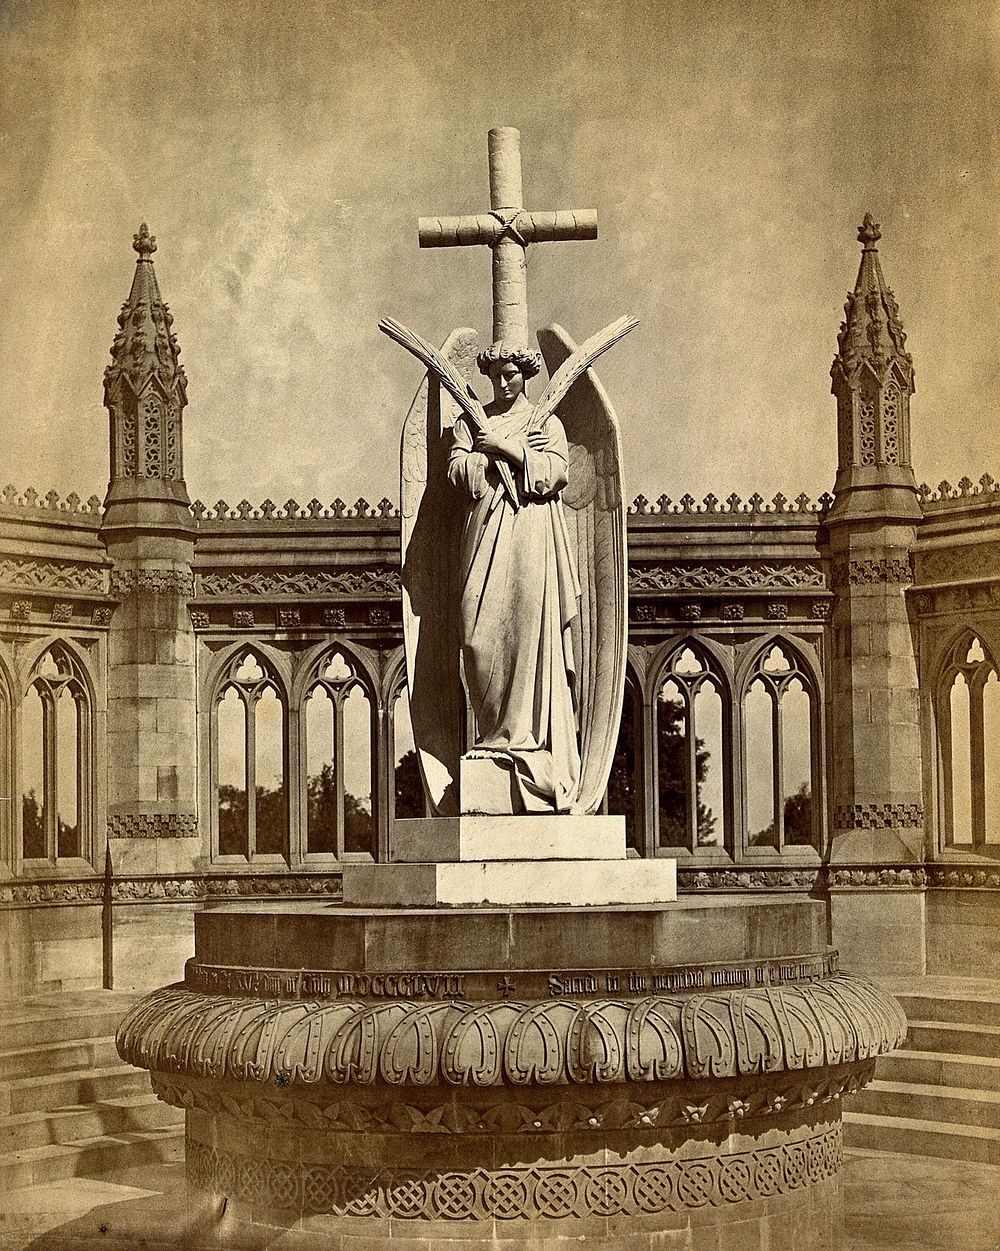 Kānpur, India: the memorial to the massacre of 1857. Photograph attributed to S. Bourne, 186-.